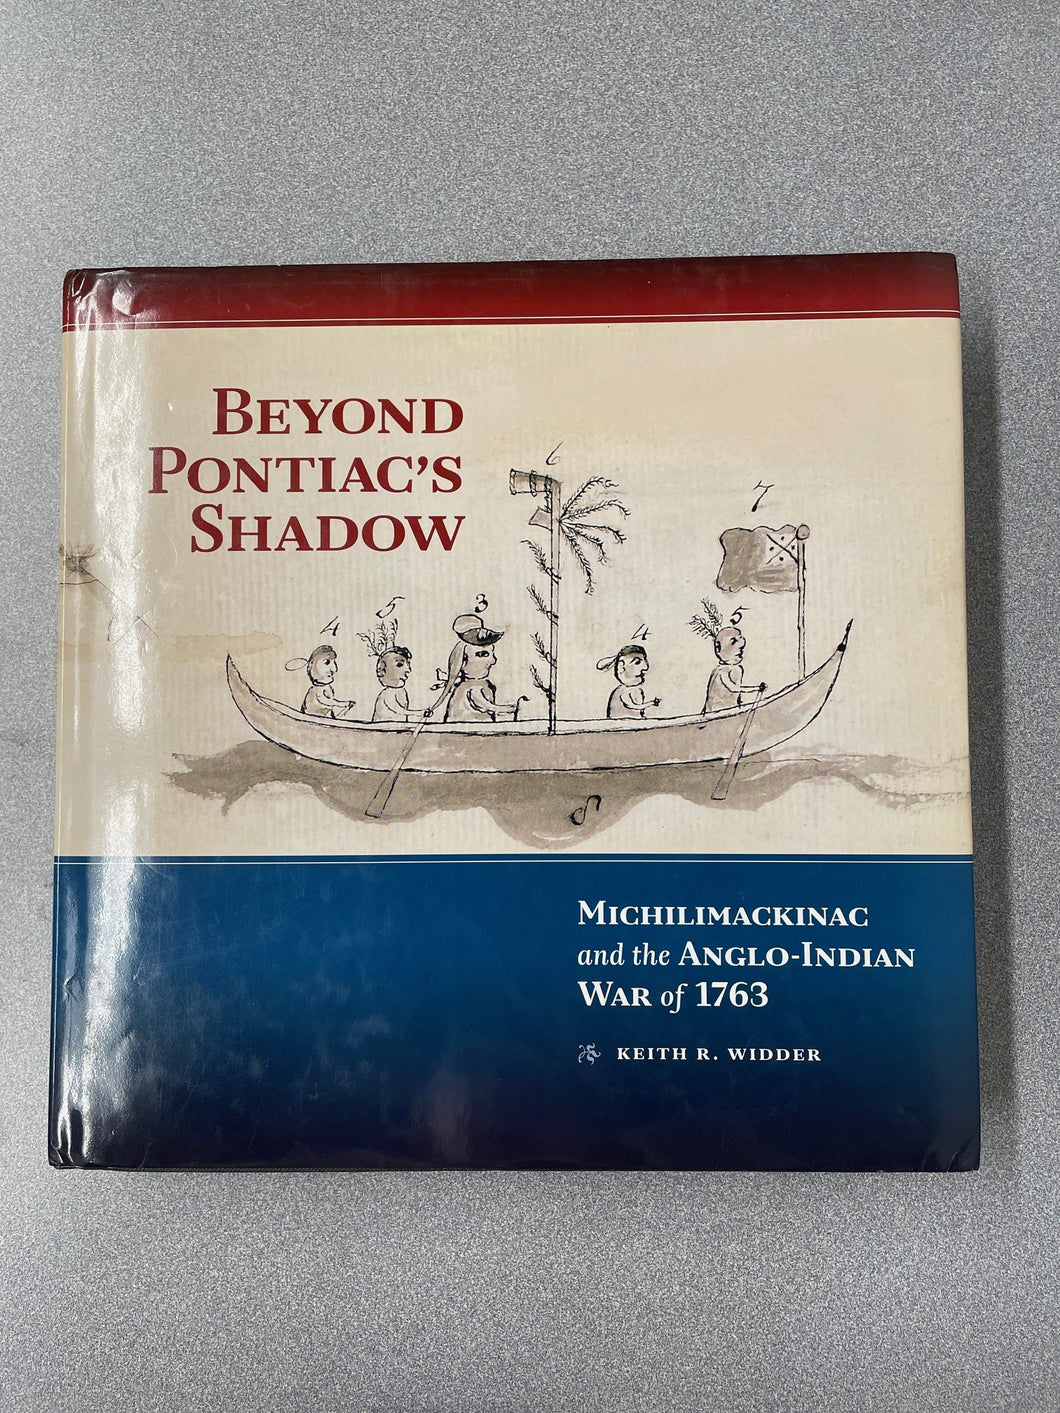 MI  Beyond Pontiac's Shadow: Michilimackinac and the Anglo-Indian War of 1763, Widder, Keith R. [2013] N  1/24